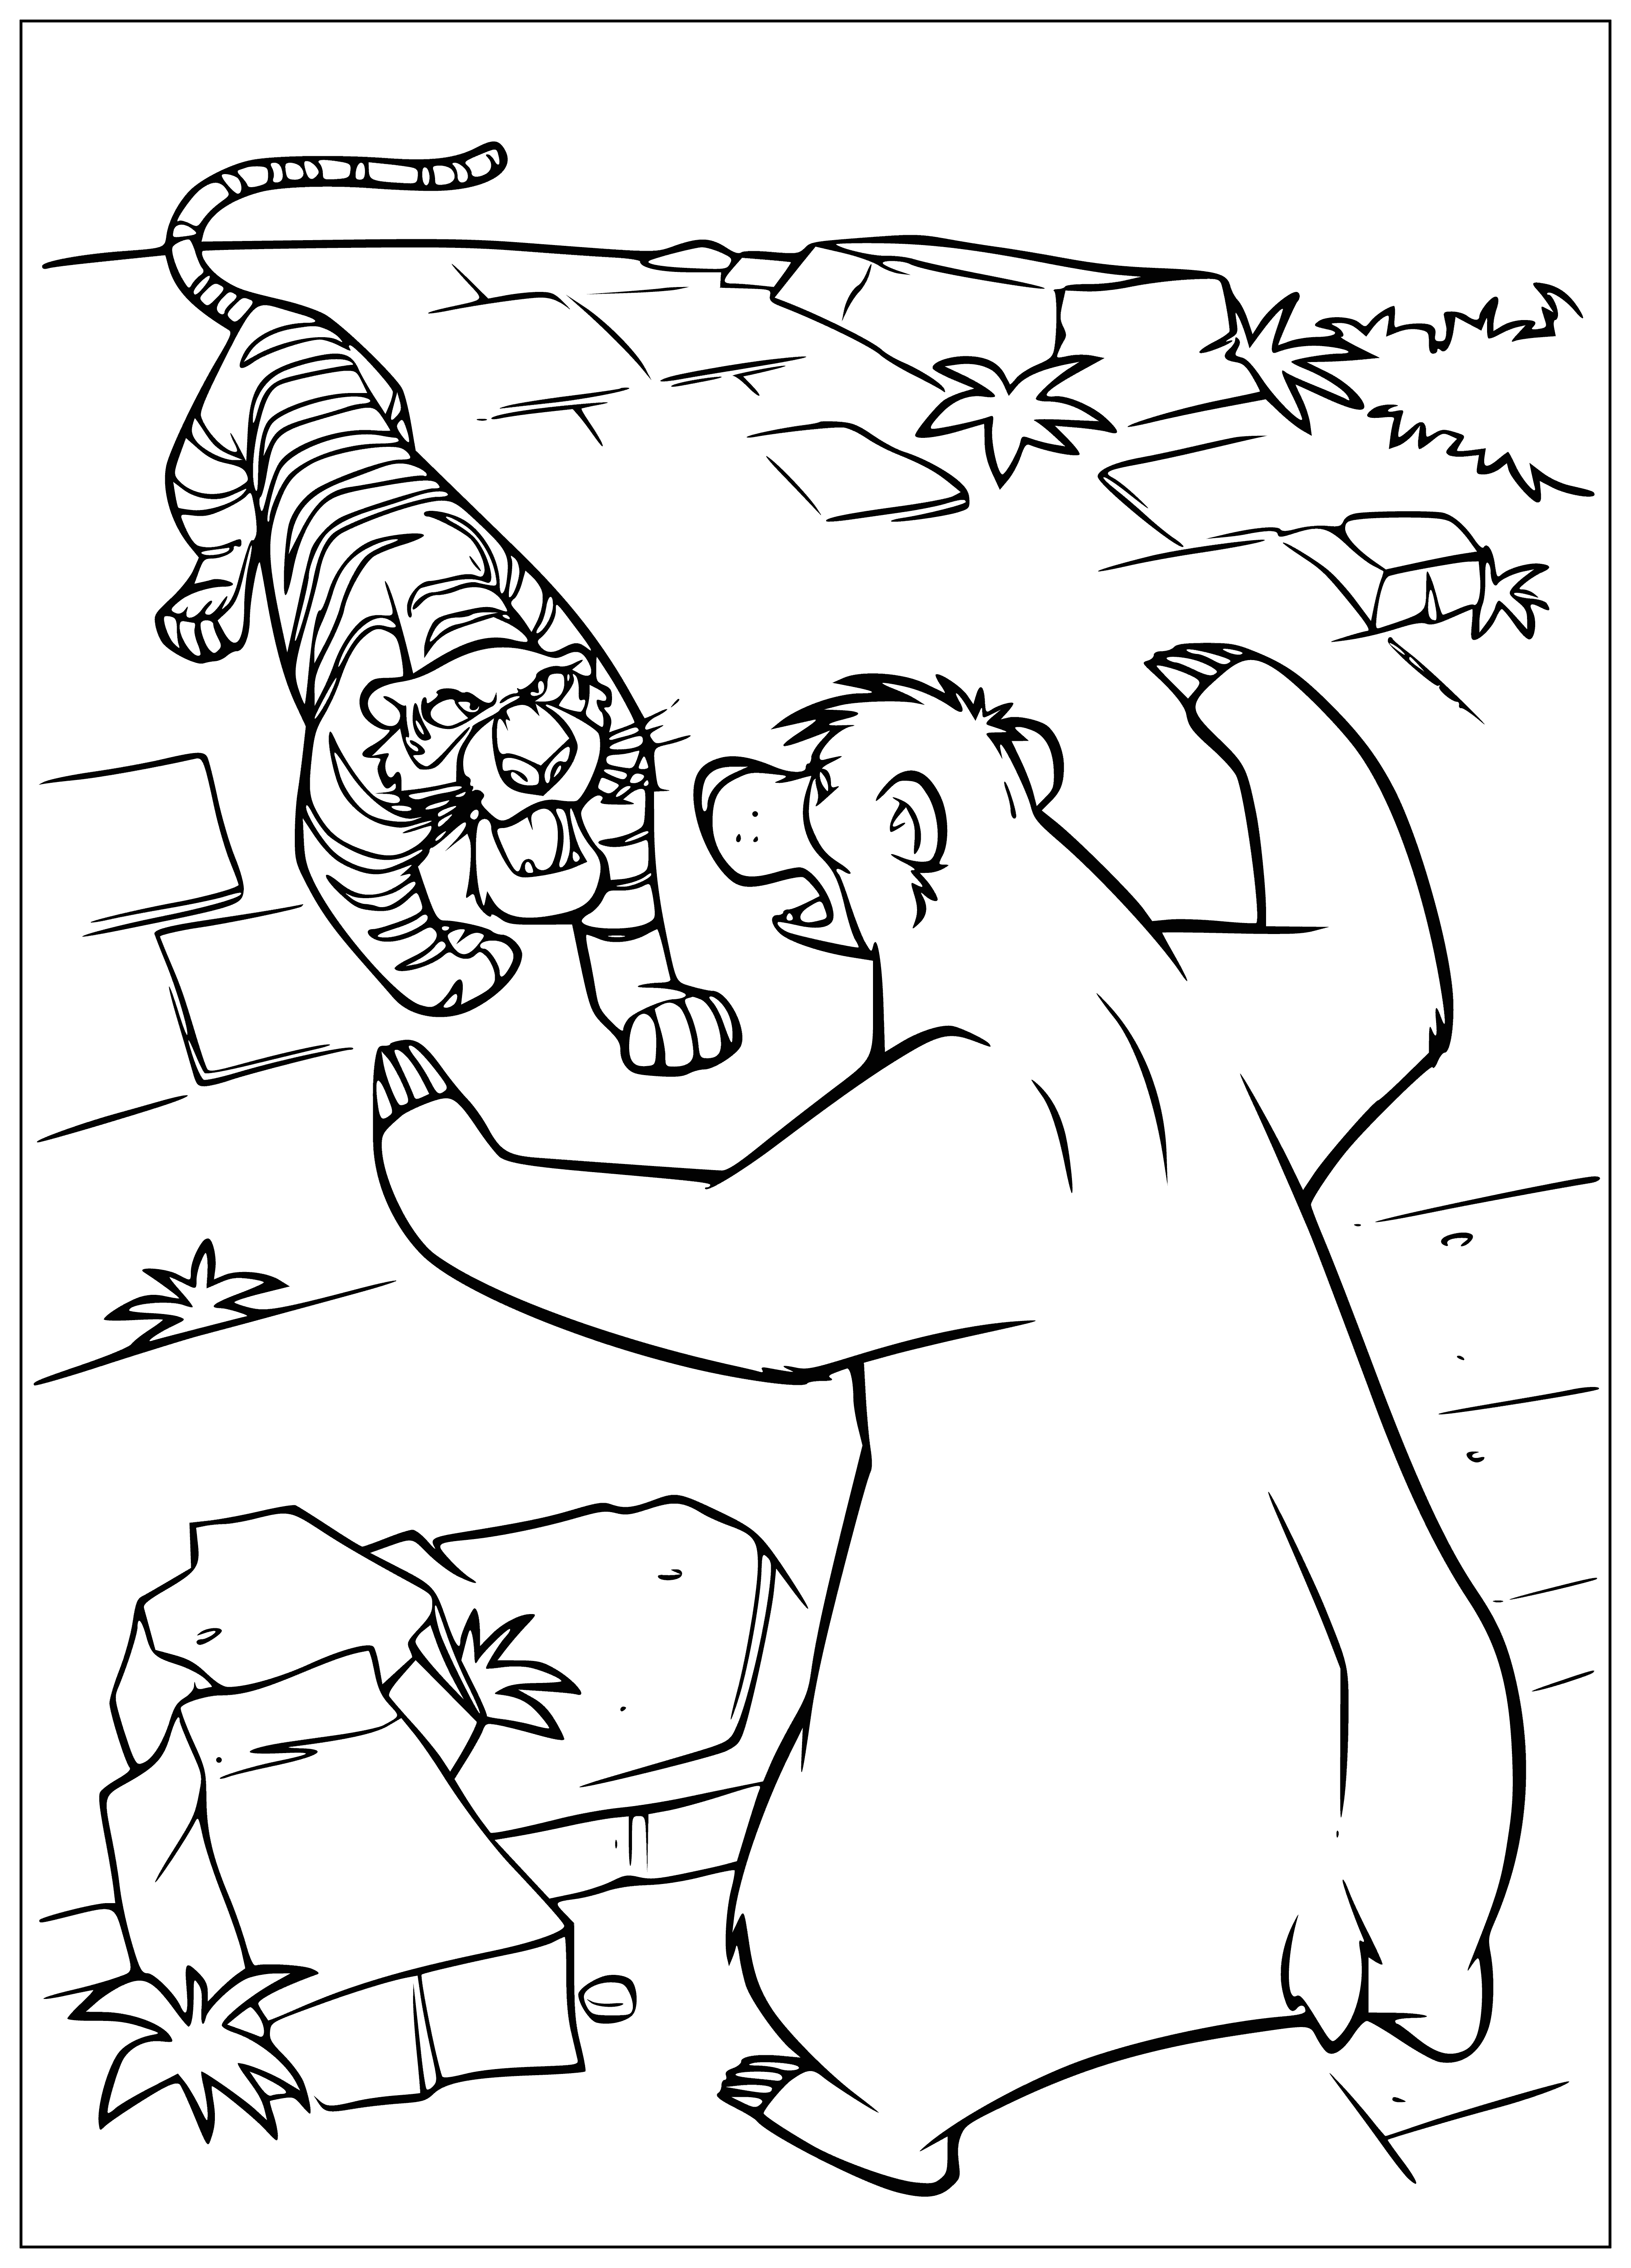 Baloo and Shere Khan coloring page